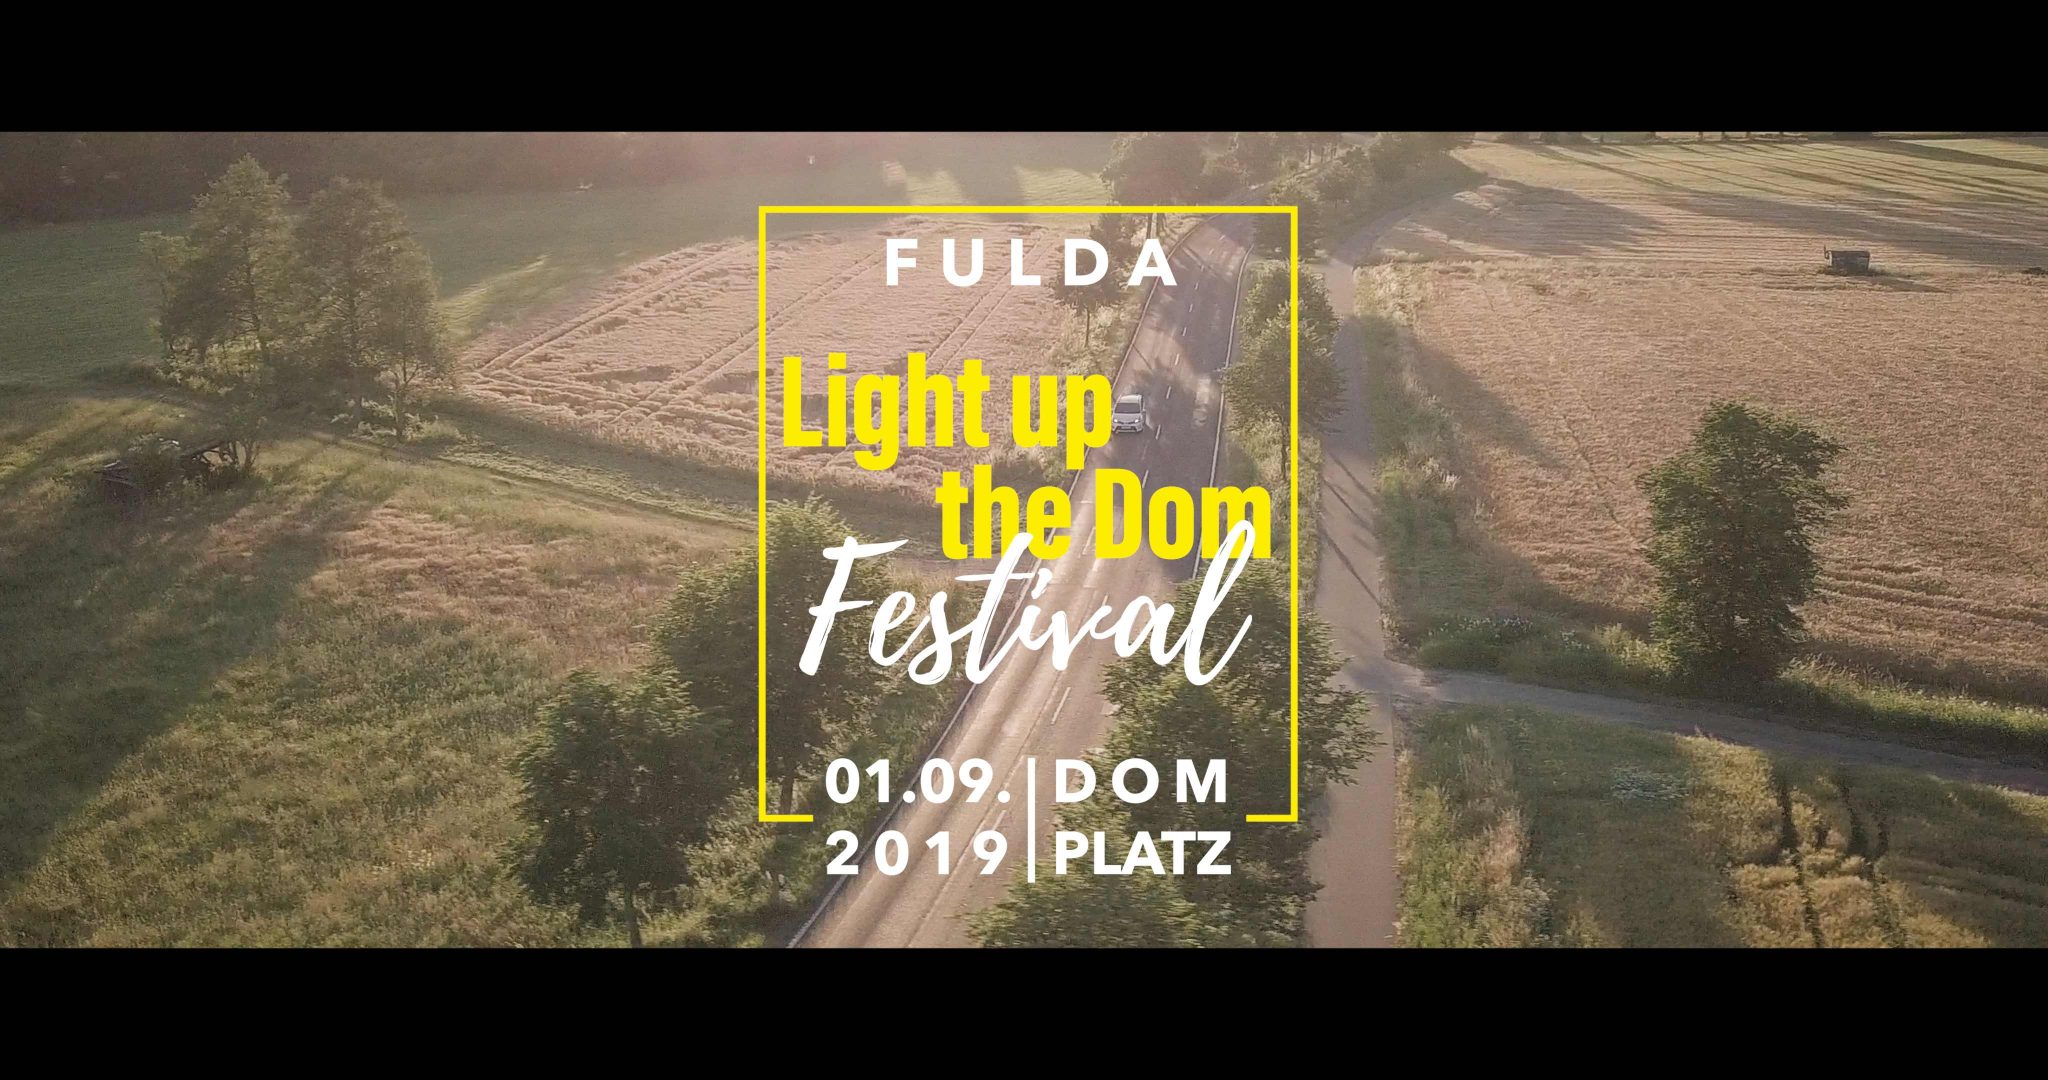 Light up the Dome Festival – Opening Video